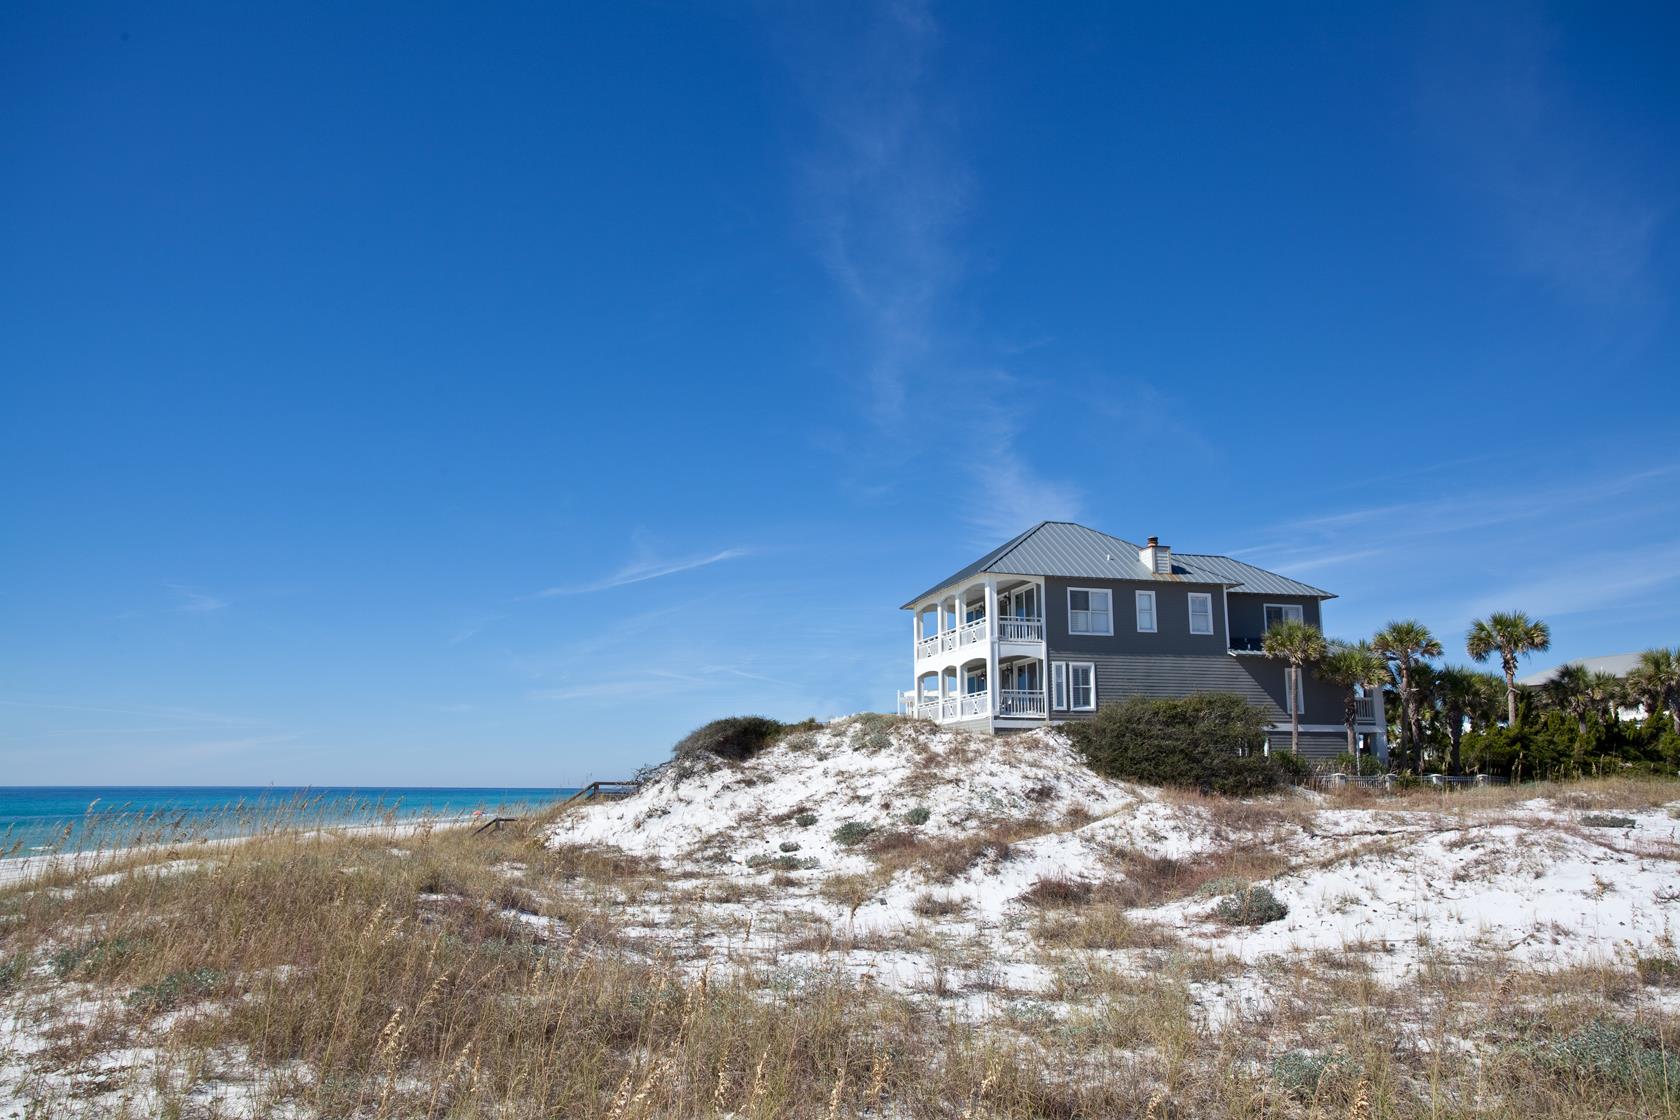 Dune Allen Realty The Leader in 30A Vacation Rentals